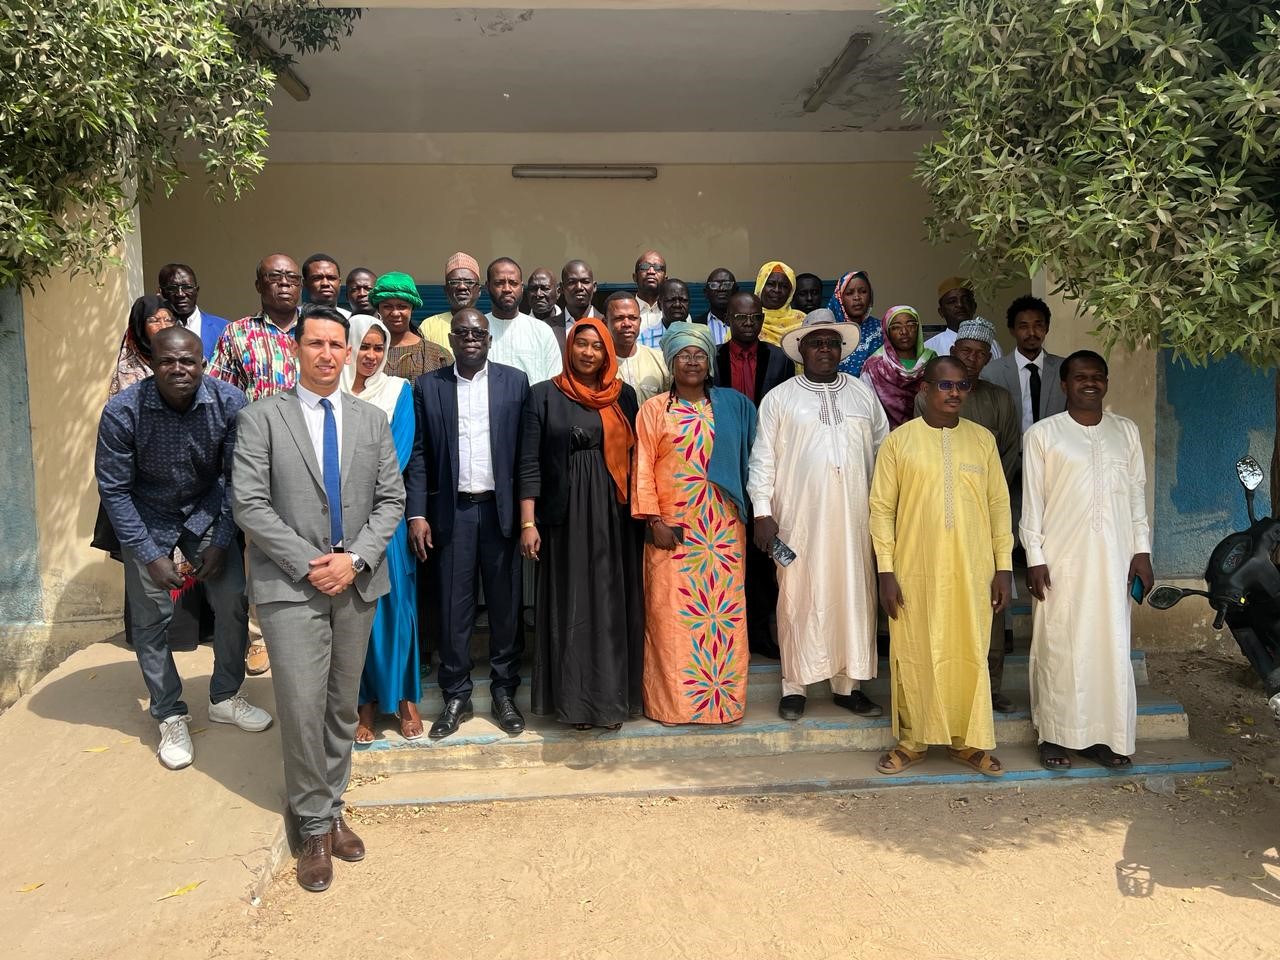  National Stakeholder Consultation Workshop for the Development of the Reversing the degradation trend in the oases of Borkou, Ennedi West and Wadi-Fira